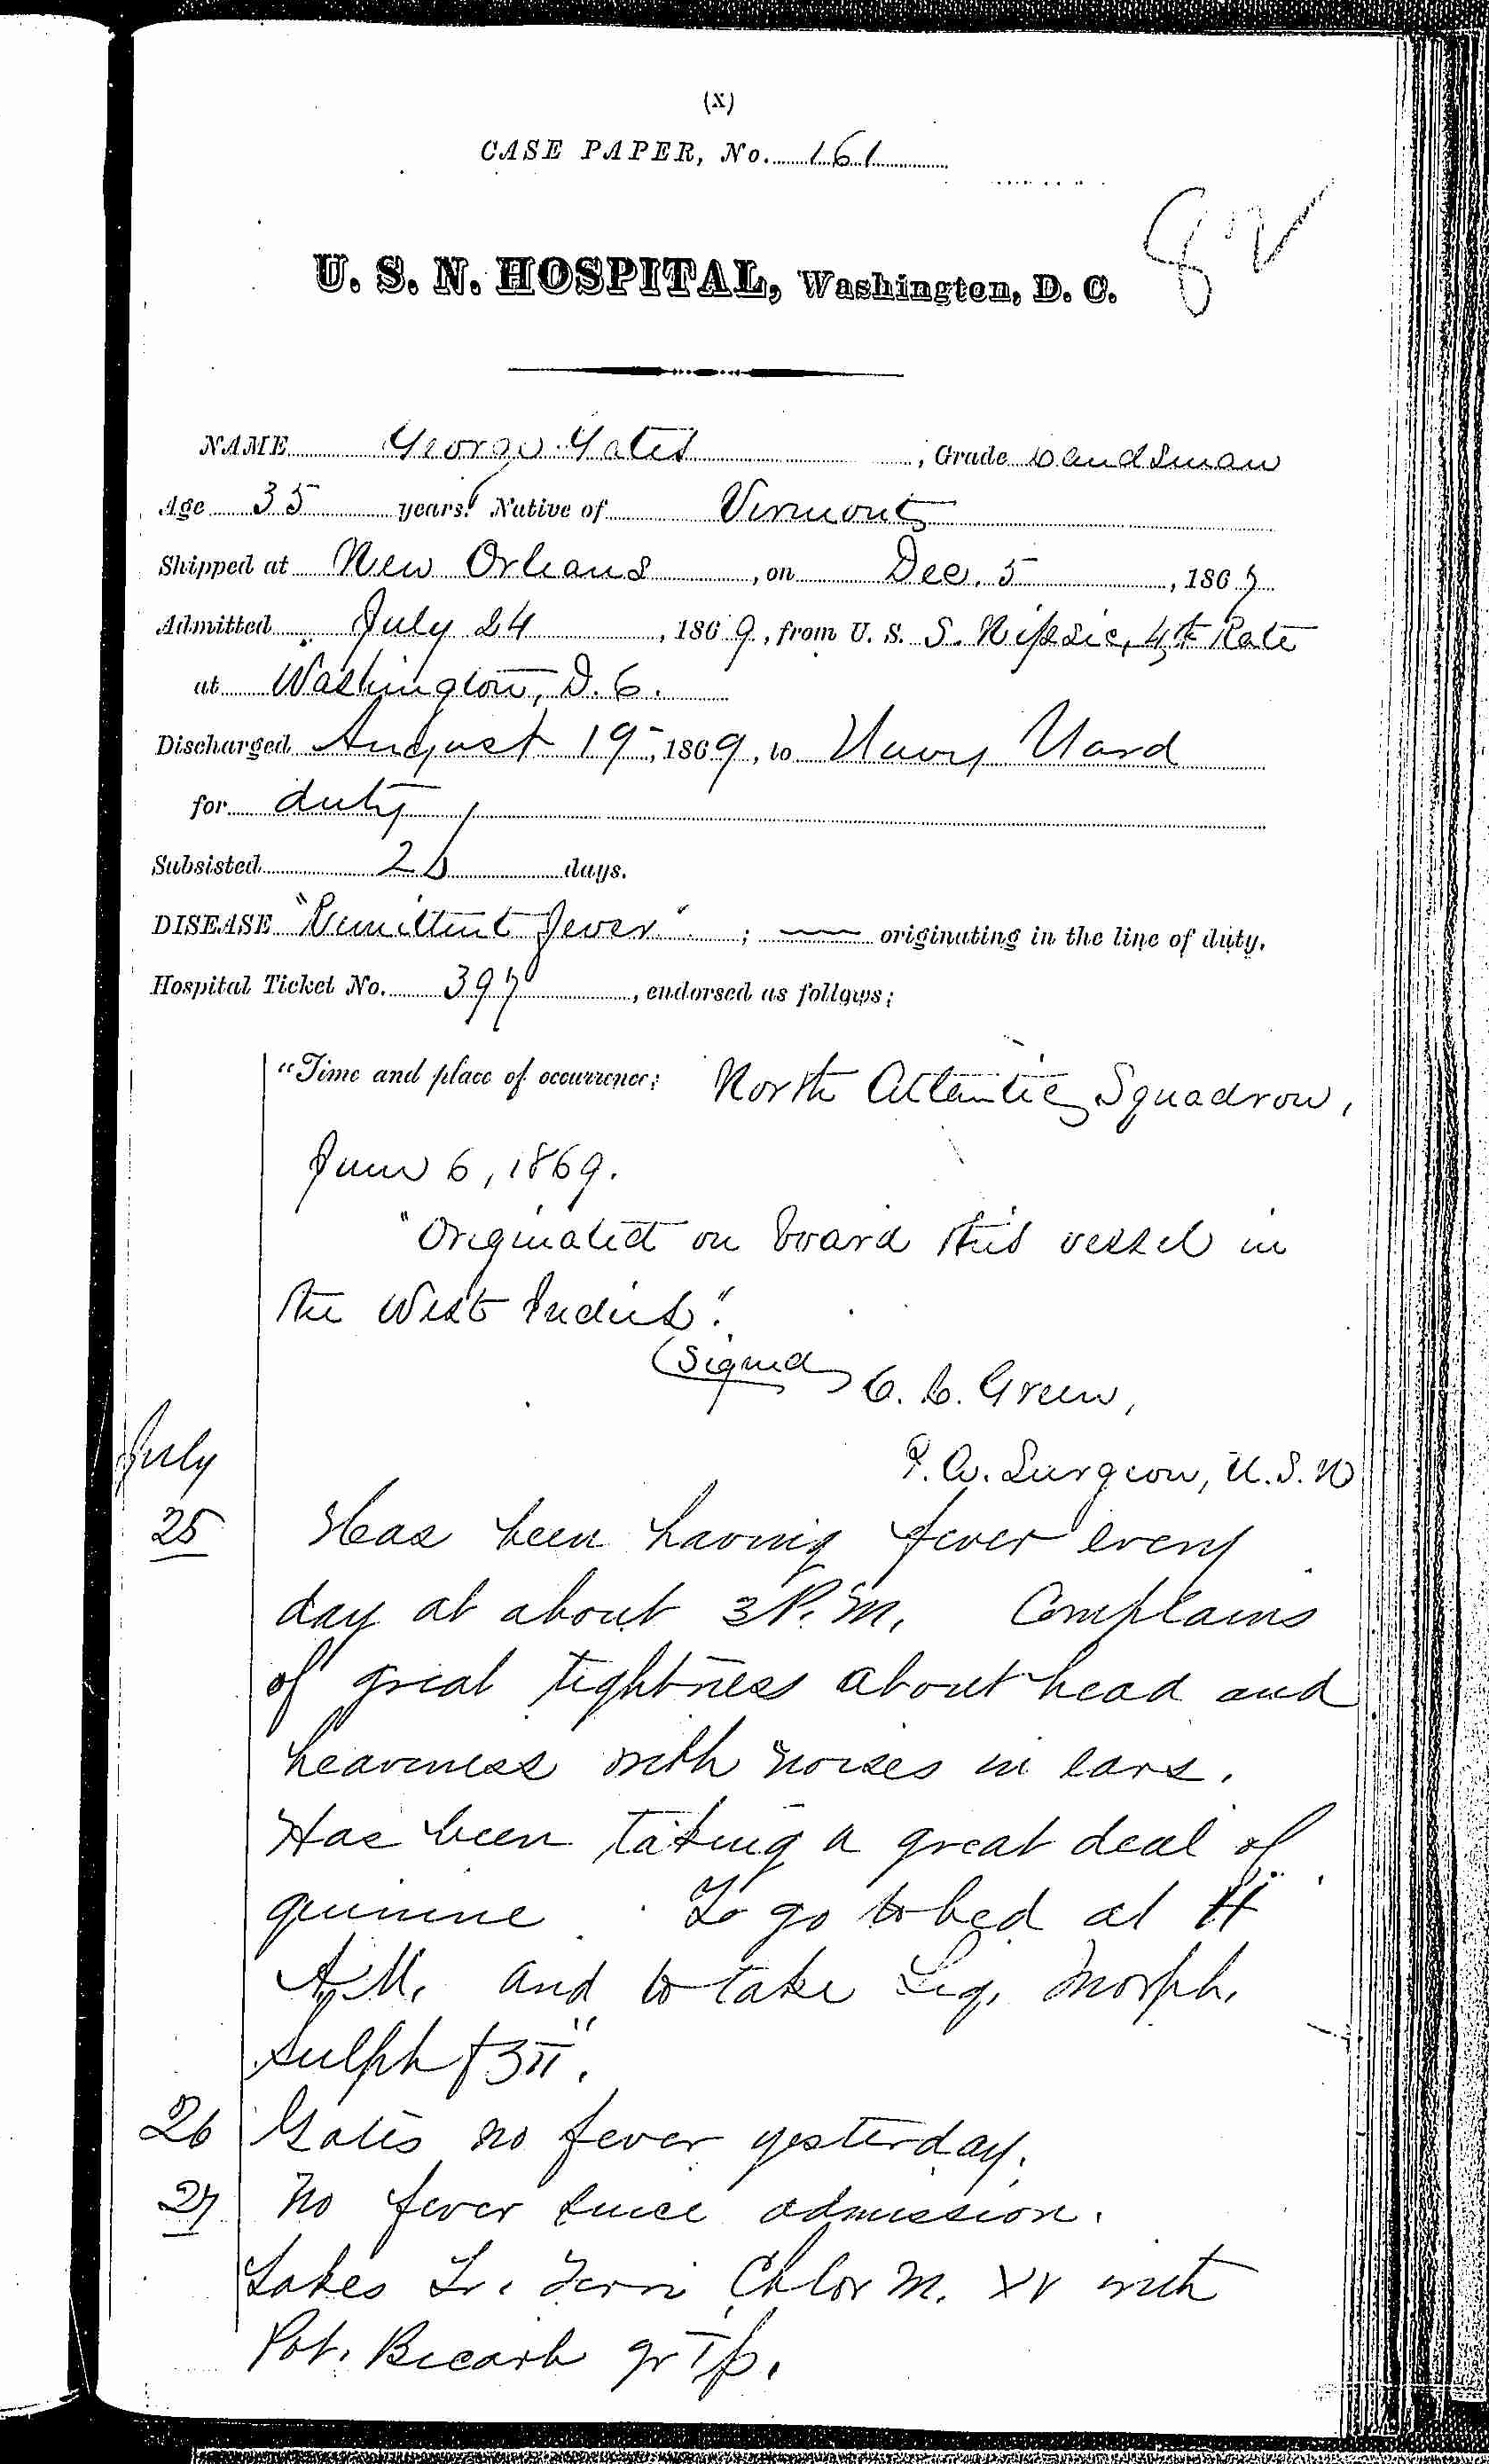 Entry for George Gates (page 1 of 2) in the log Hospital Tickets and Case Papers - Naval Hospital - Washington, D.C. - 1868-69